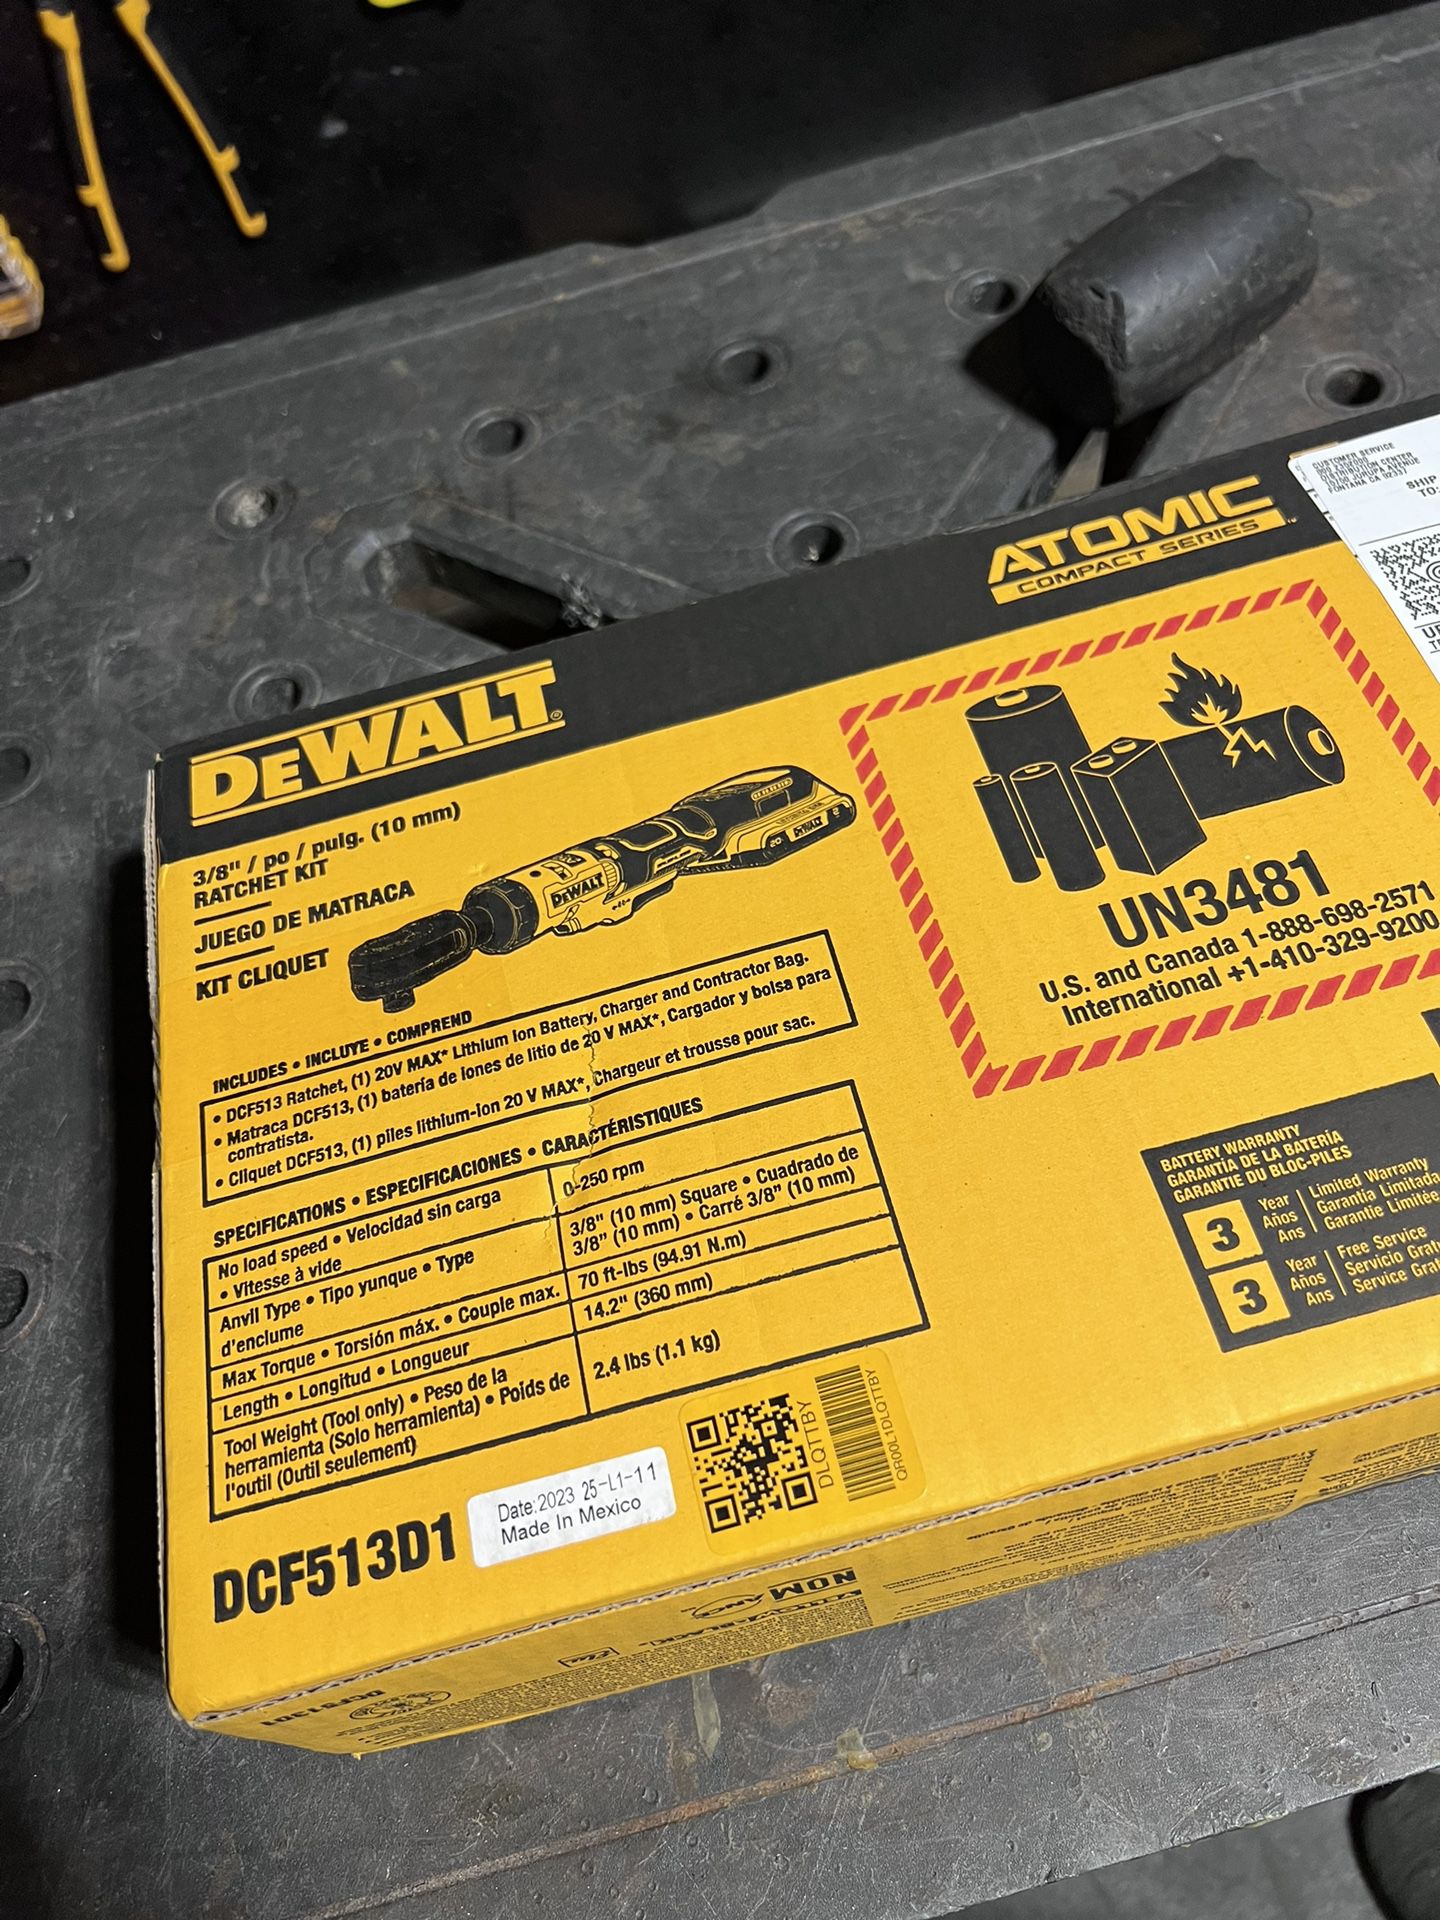 DEWALT 20V MAX Ratchet Set, 3/8 inch, 70 lbs of Torque, Battery and Storage  Bag Included (DCF513D1) for Sale in Anaheim, CA OfferUp